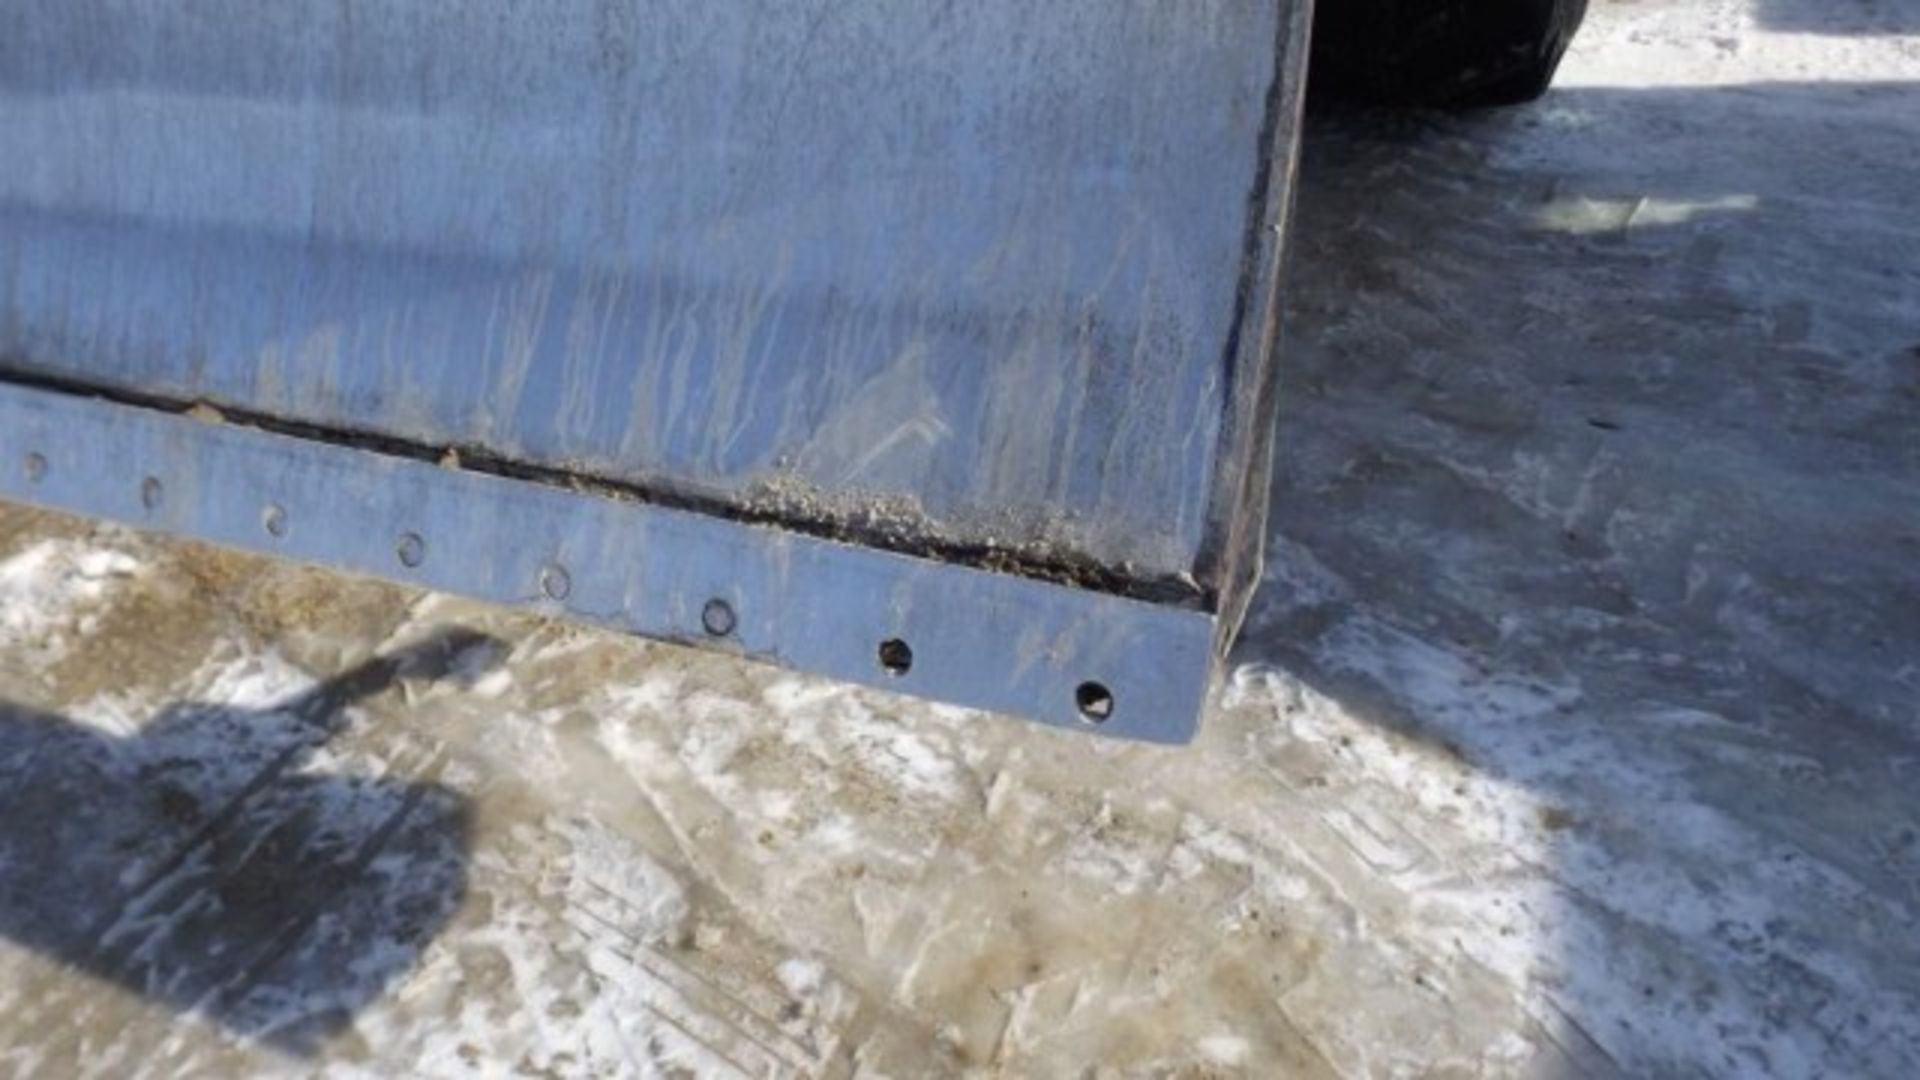 Ag Pro 660 Grouser 16' Front Blade & Brackets Selling off of T9060 ( Seller will remove if purchased - Image 7 of 10